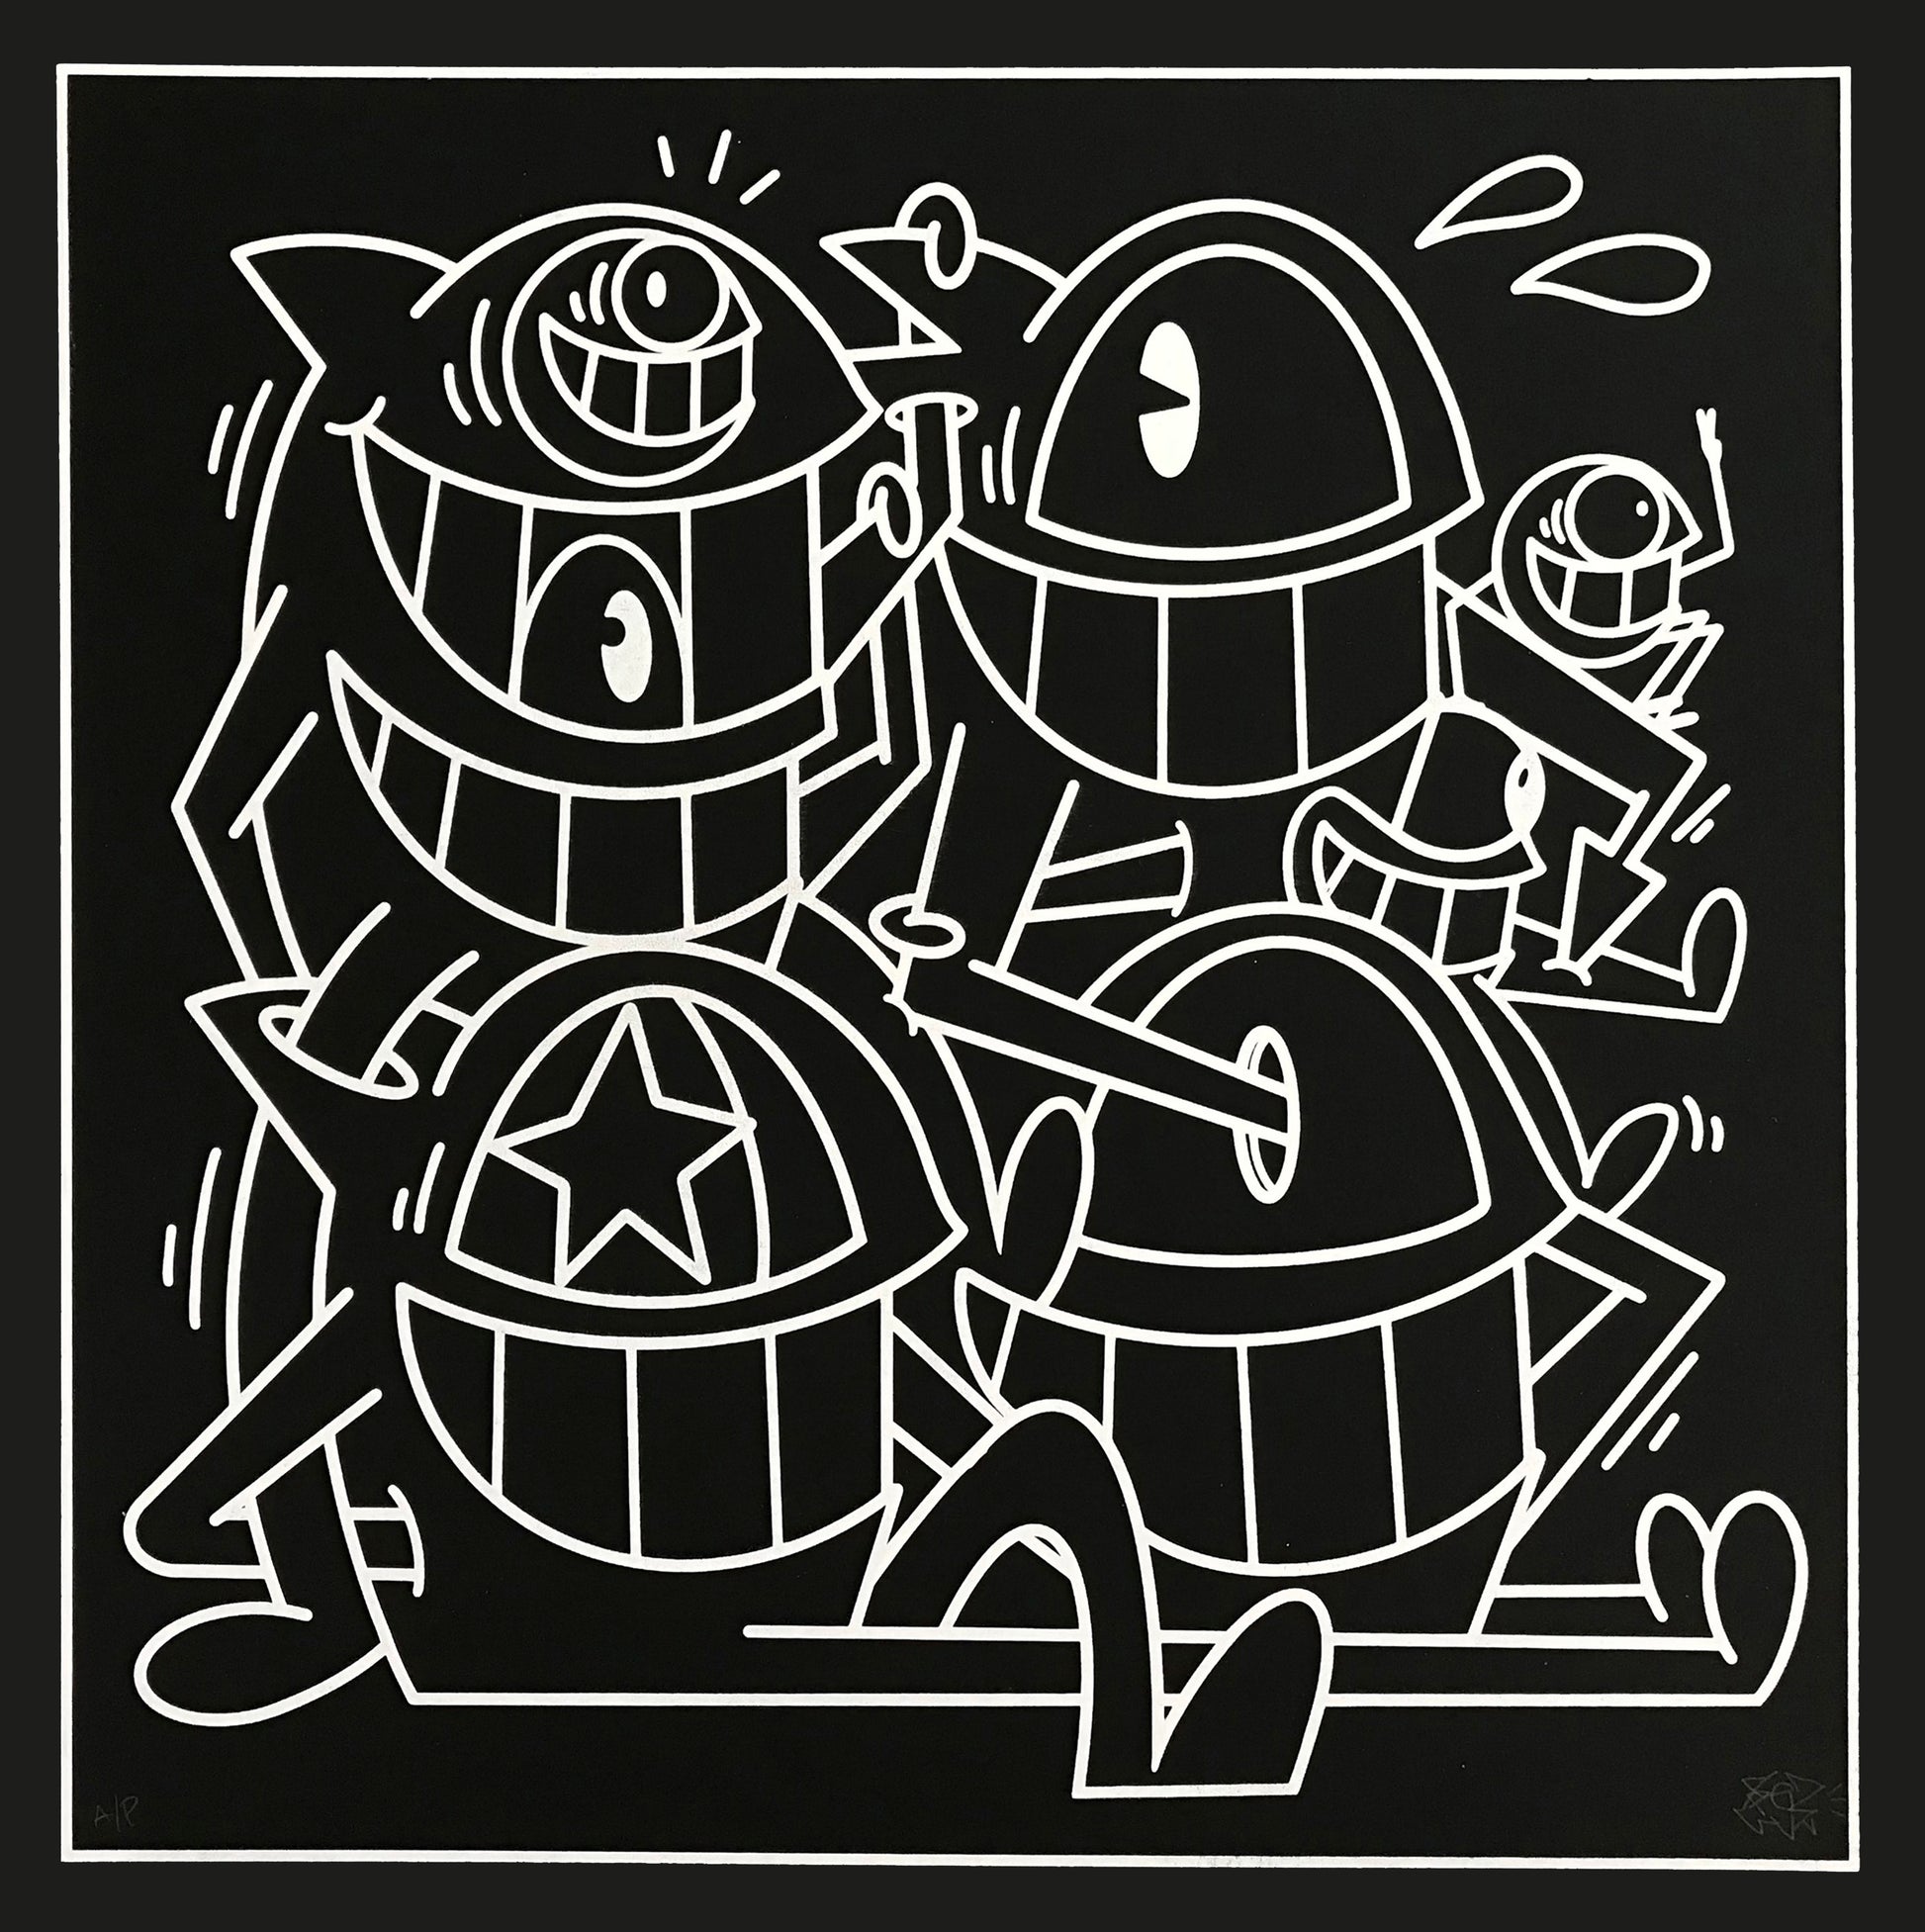 Pez Print “Connected Crew” (White on Black Edition)